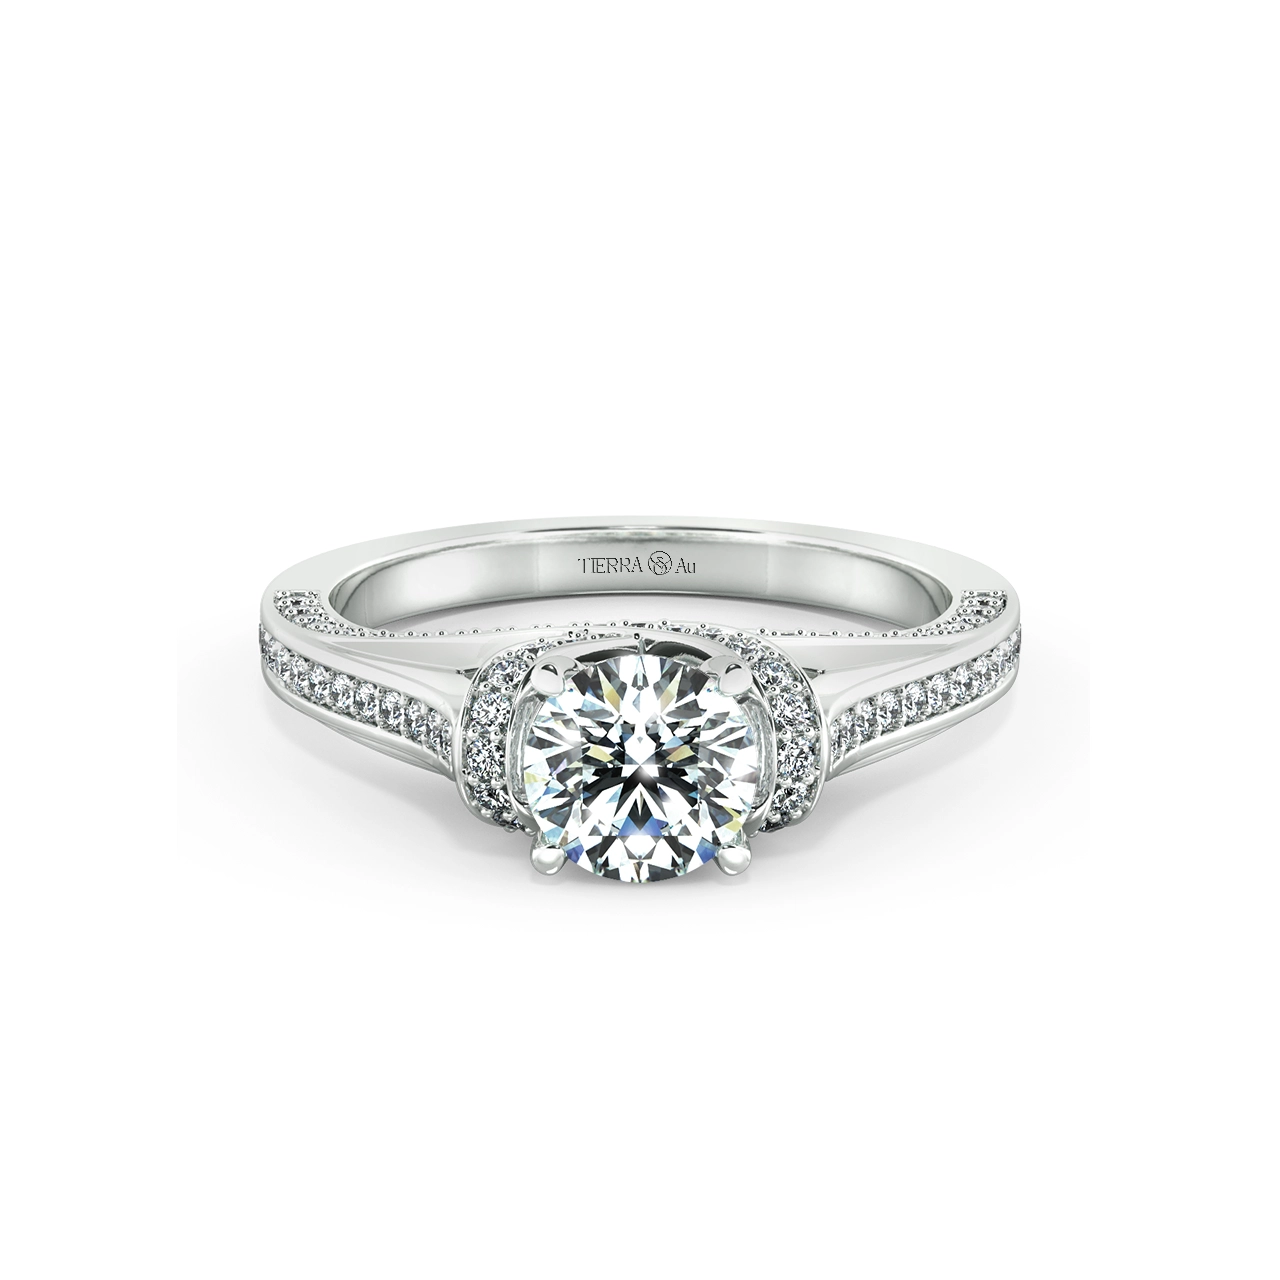 Trellis Engagement Ring with Stylized NCH1408